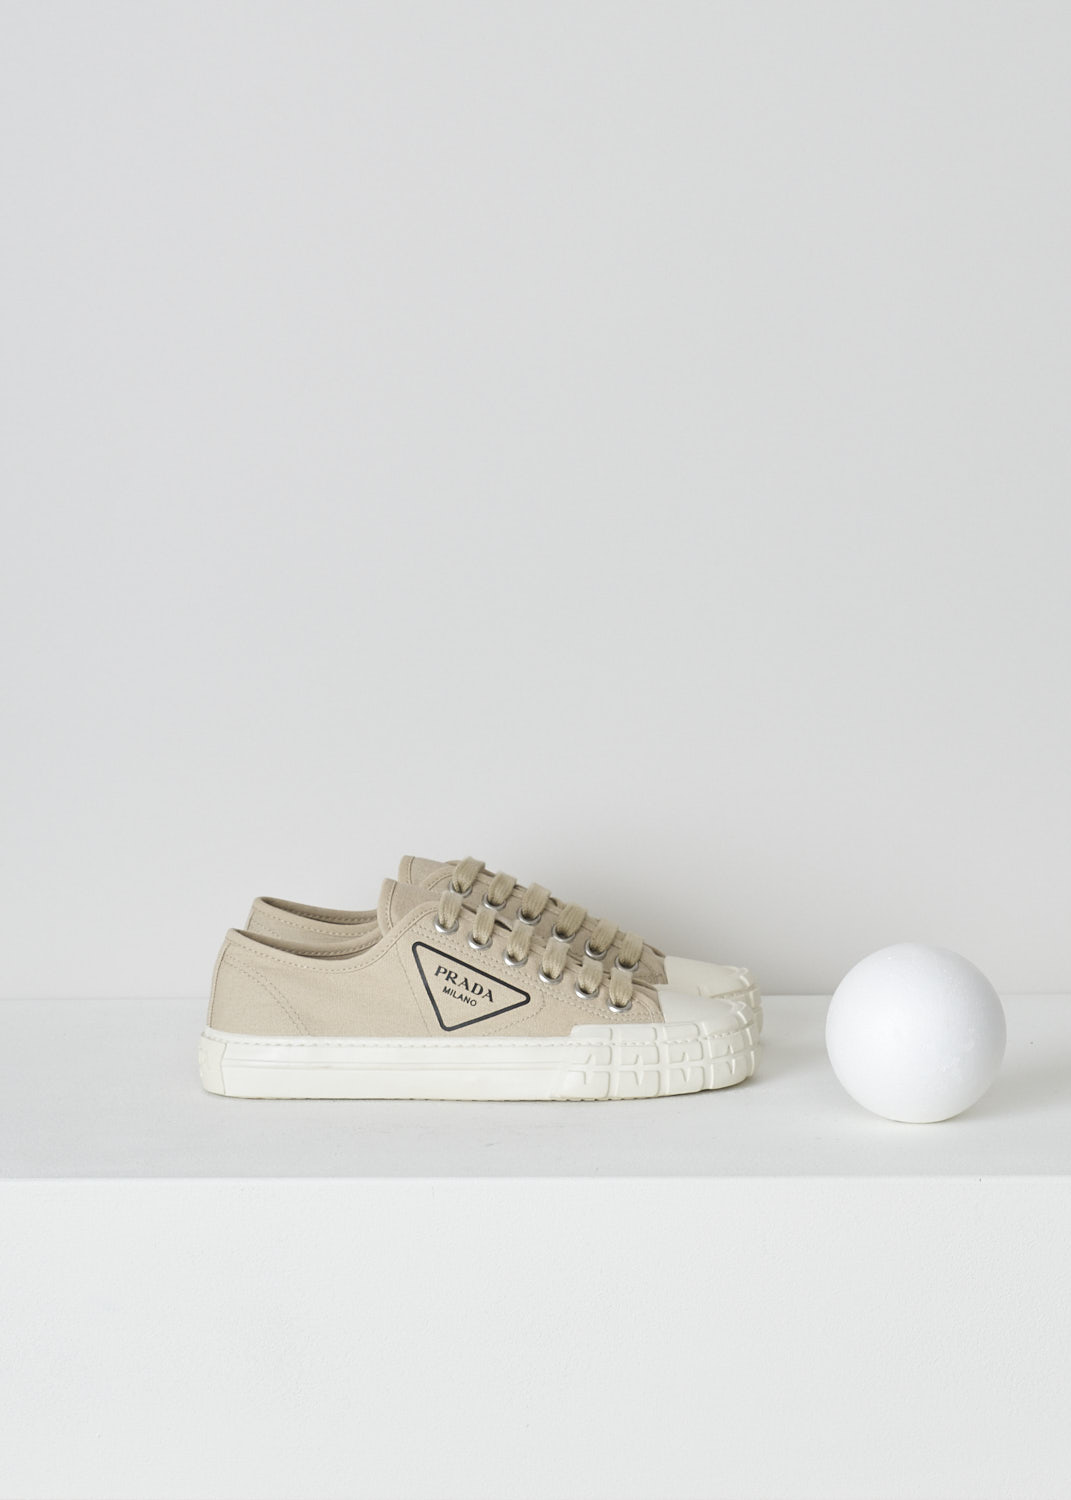 PRADA, BEIGE LOW TOP CANVAS SNEAKERS, 1E231M_2OFZ_F0065_CORDA, Beige, Side, These low top beige canvas sneakers feature a front lace-up fastening with laces in the same beige color. The brand's triangle logo can be found on the side in black rubber. These sneakers have a round toe with a white rubber toe cap and ribbed rubber soles. 
